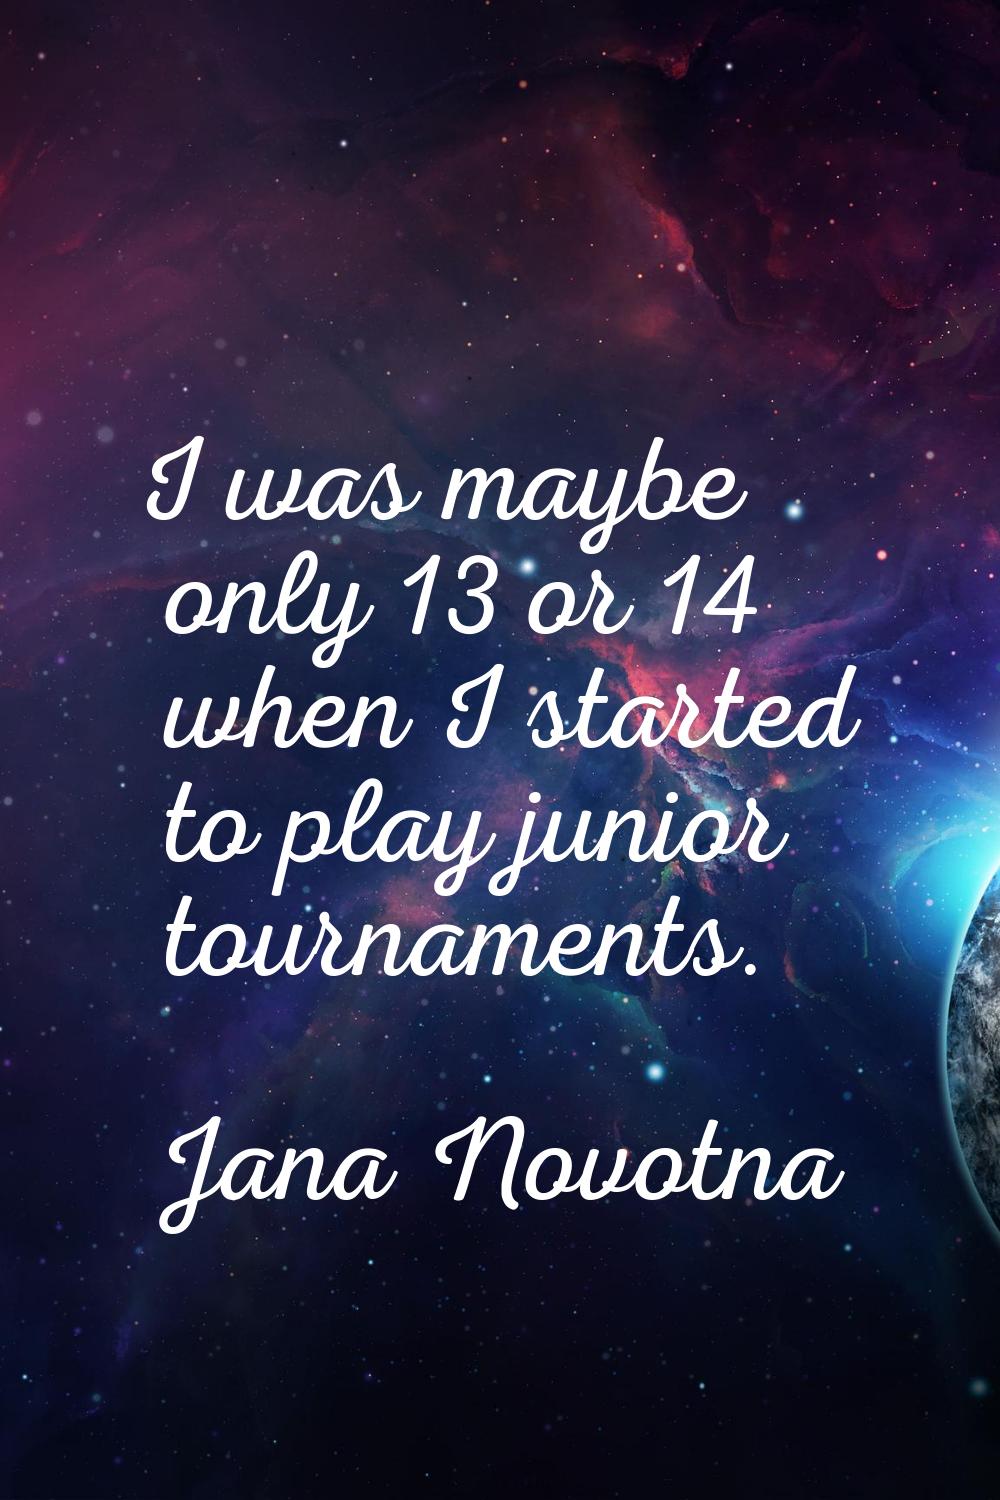 I was maybe only 13 or 14 when I started to play junior tournaments.